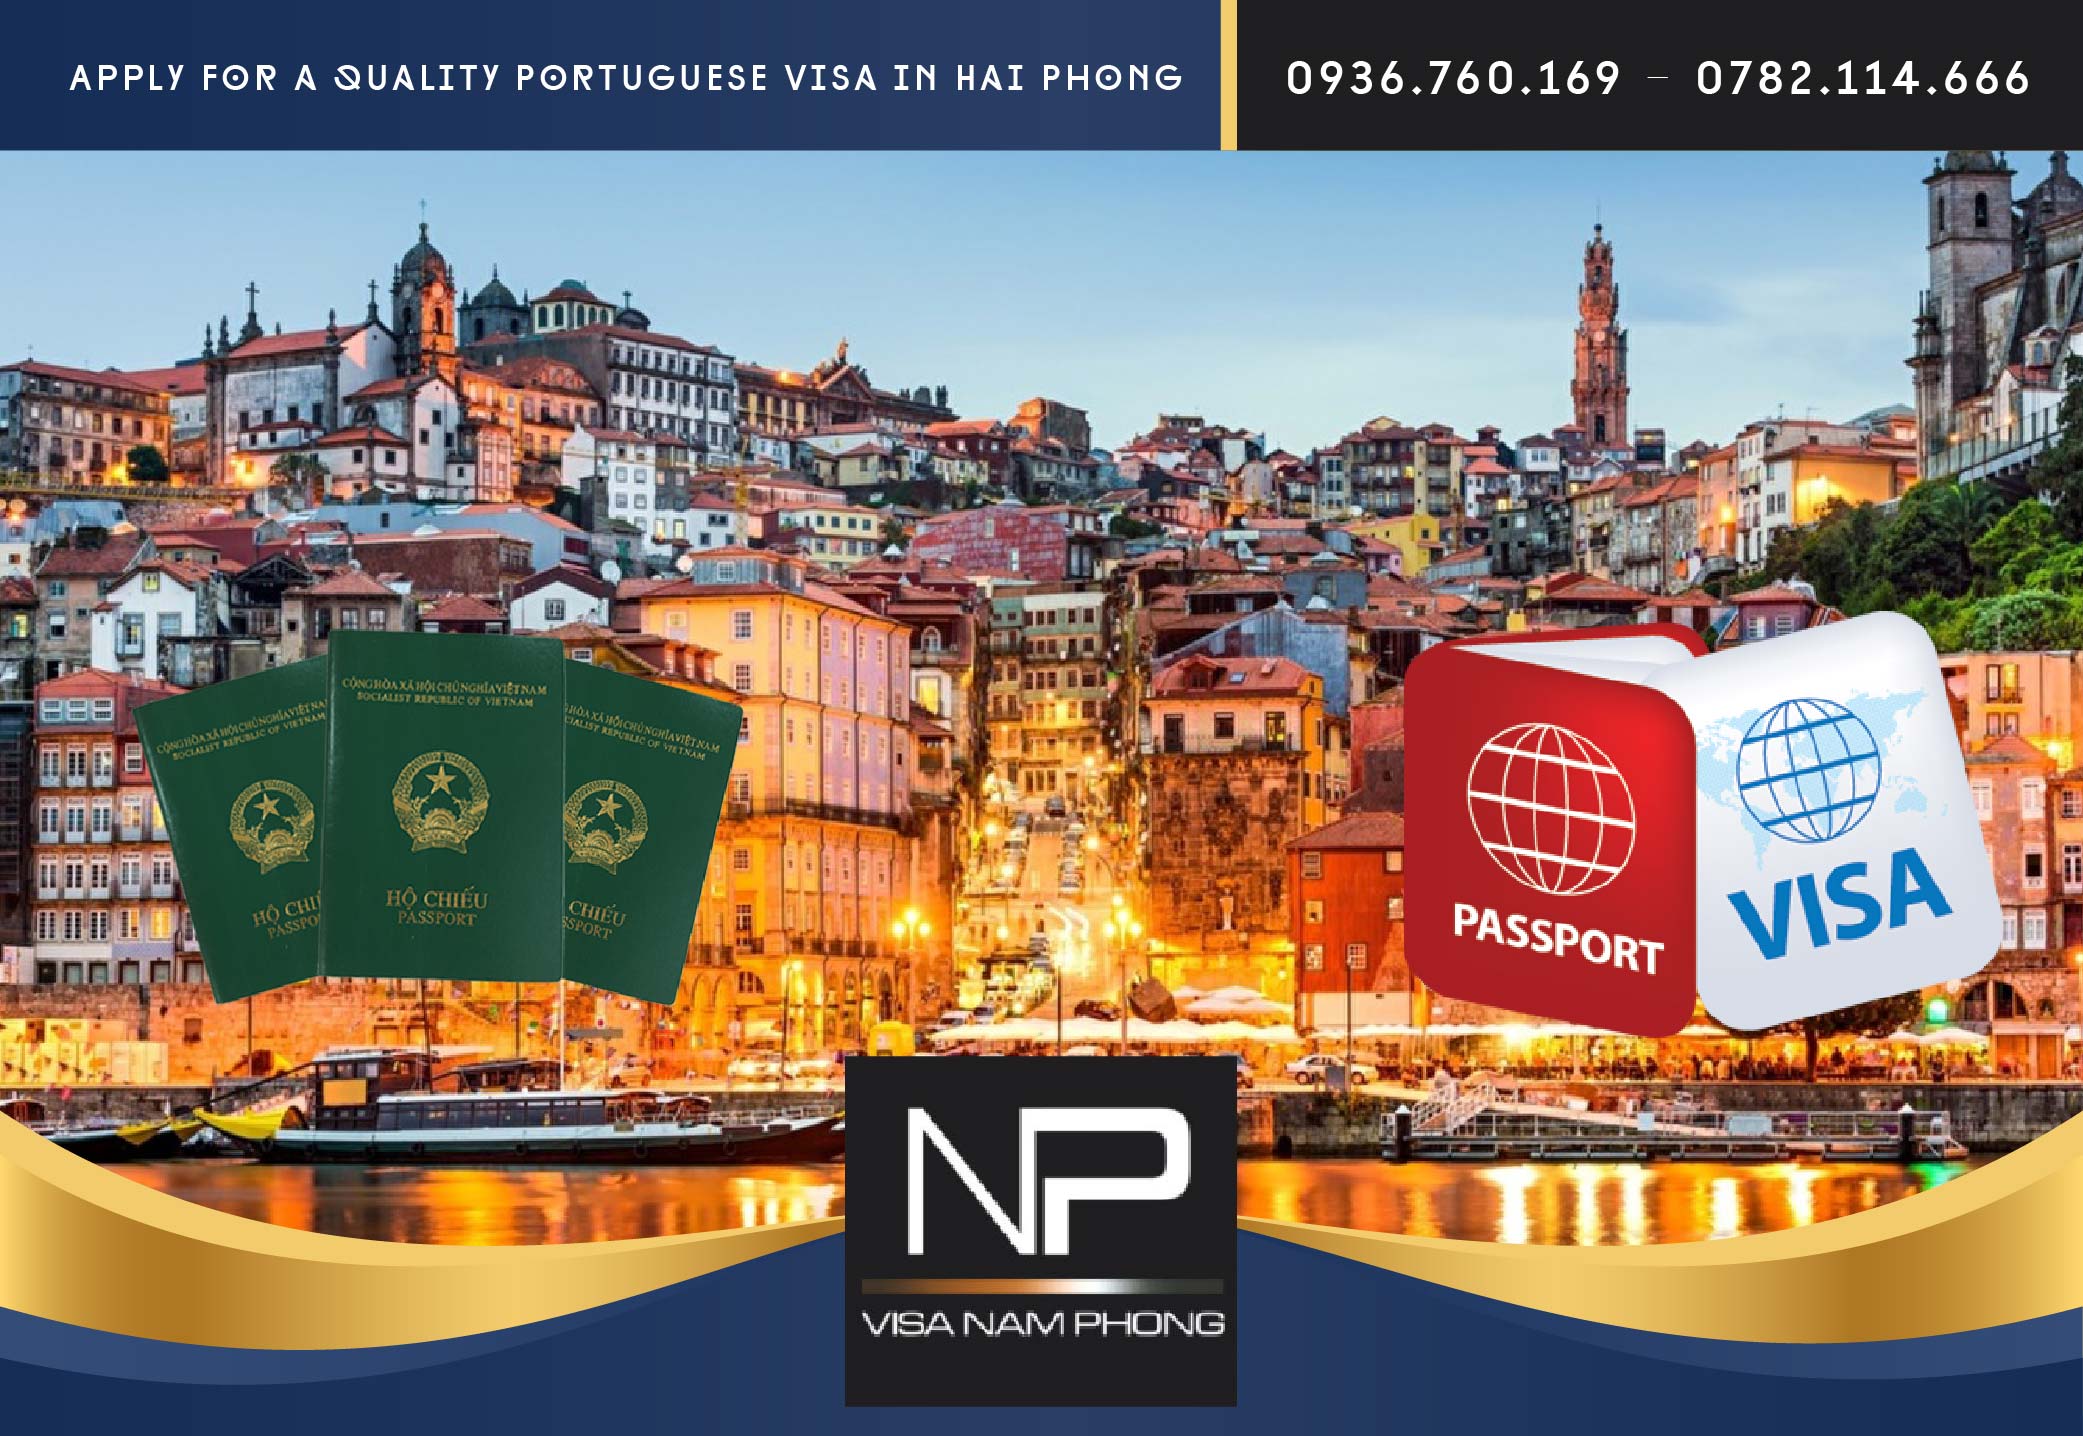 Apply for a quality Portuguese visa in Hai Phong